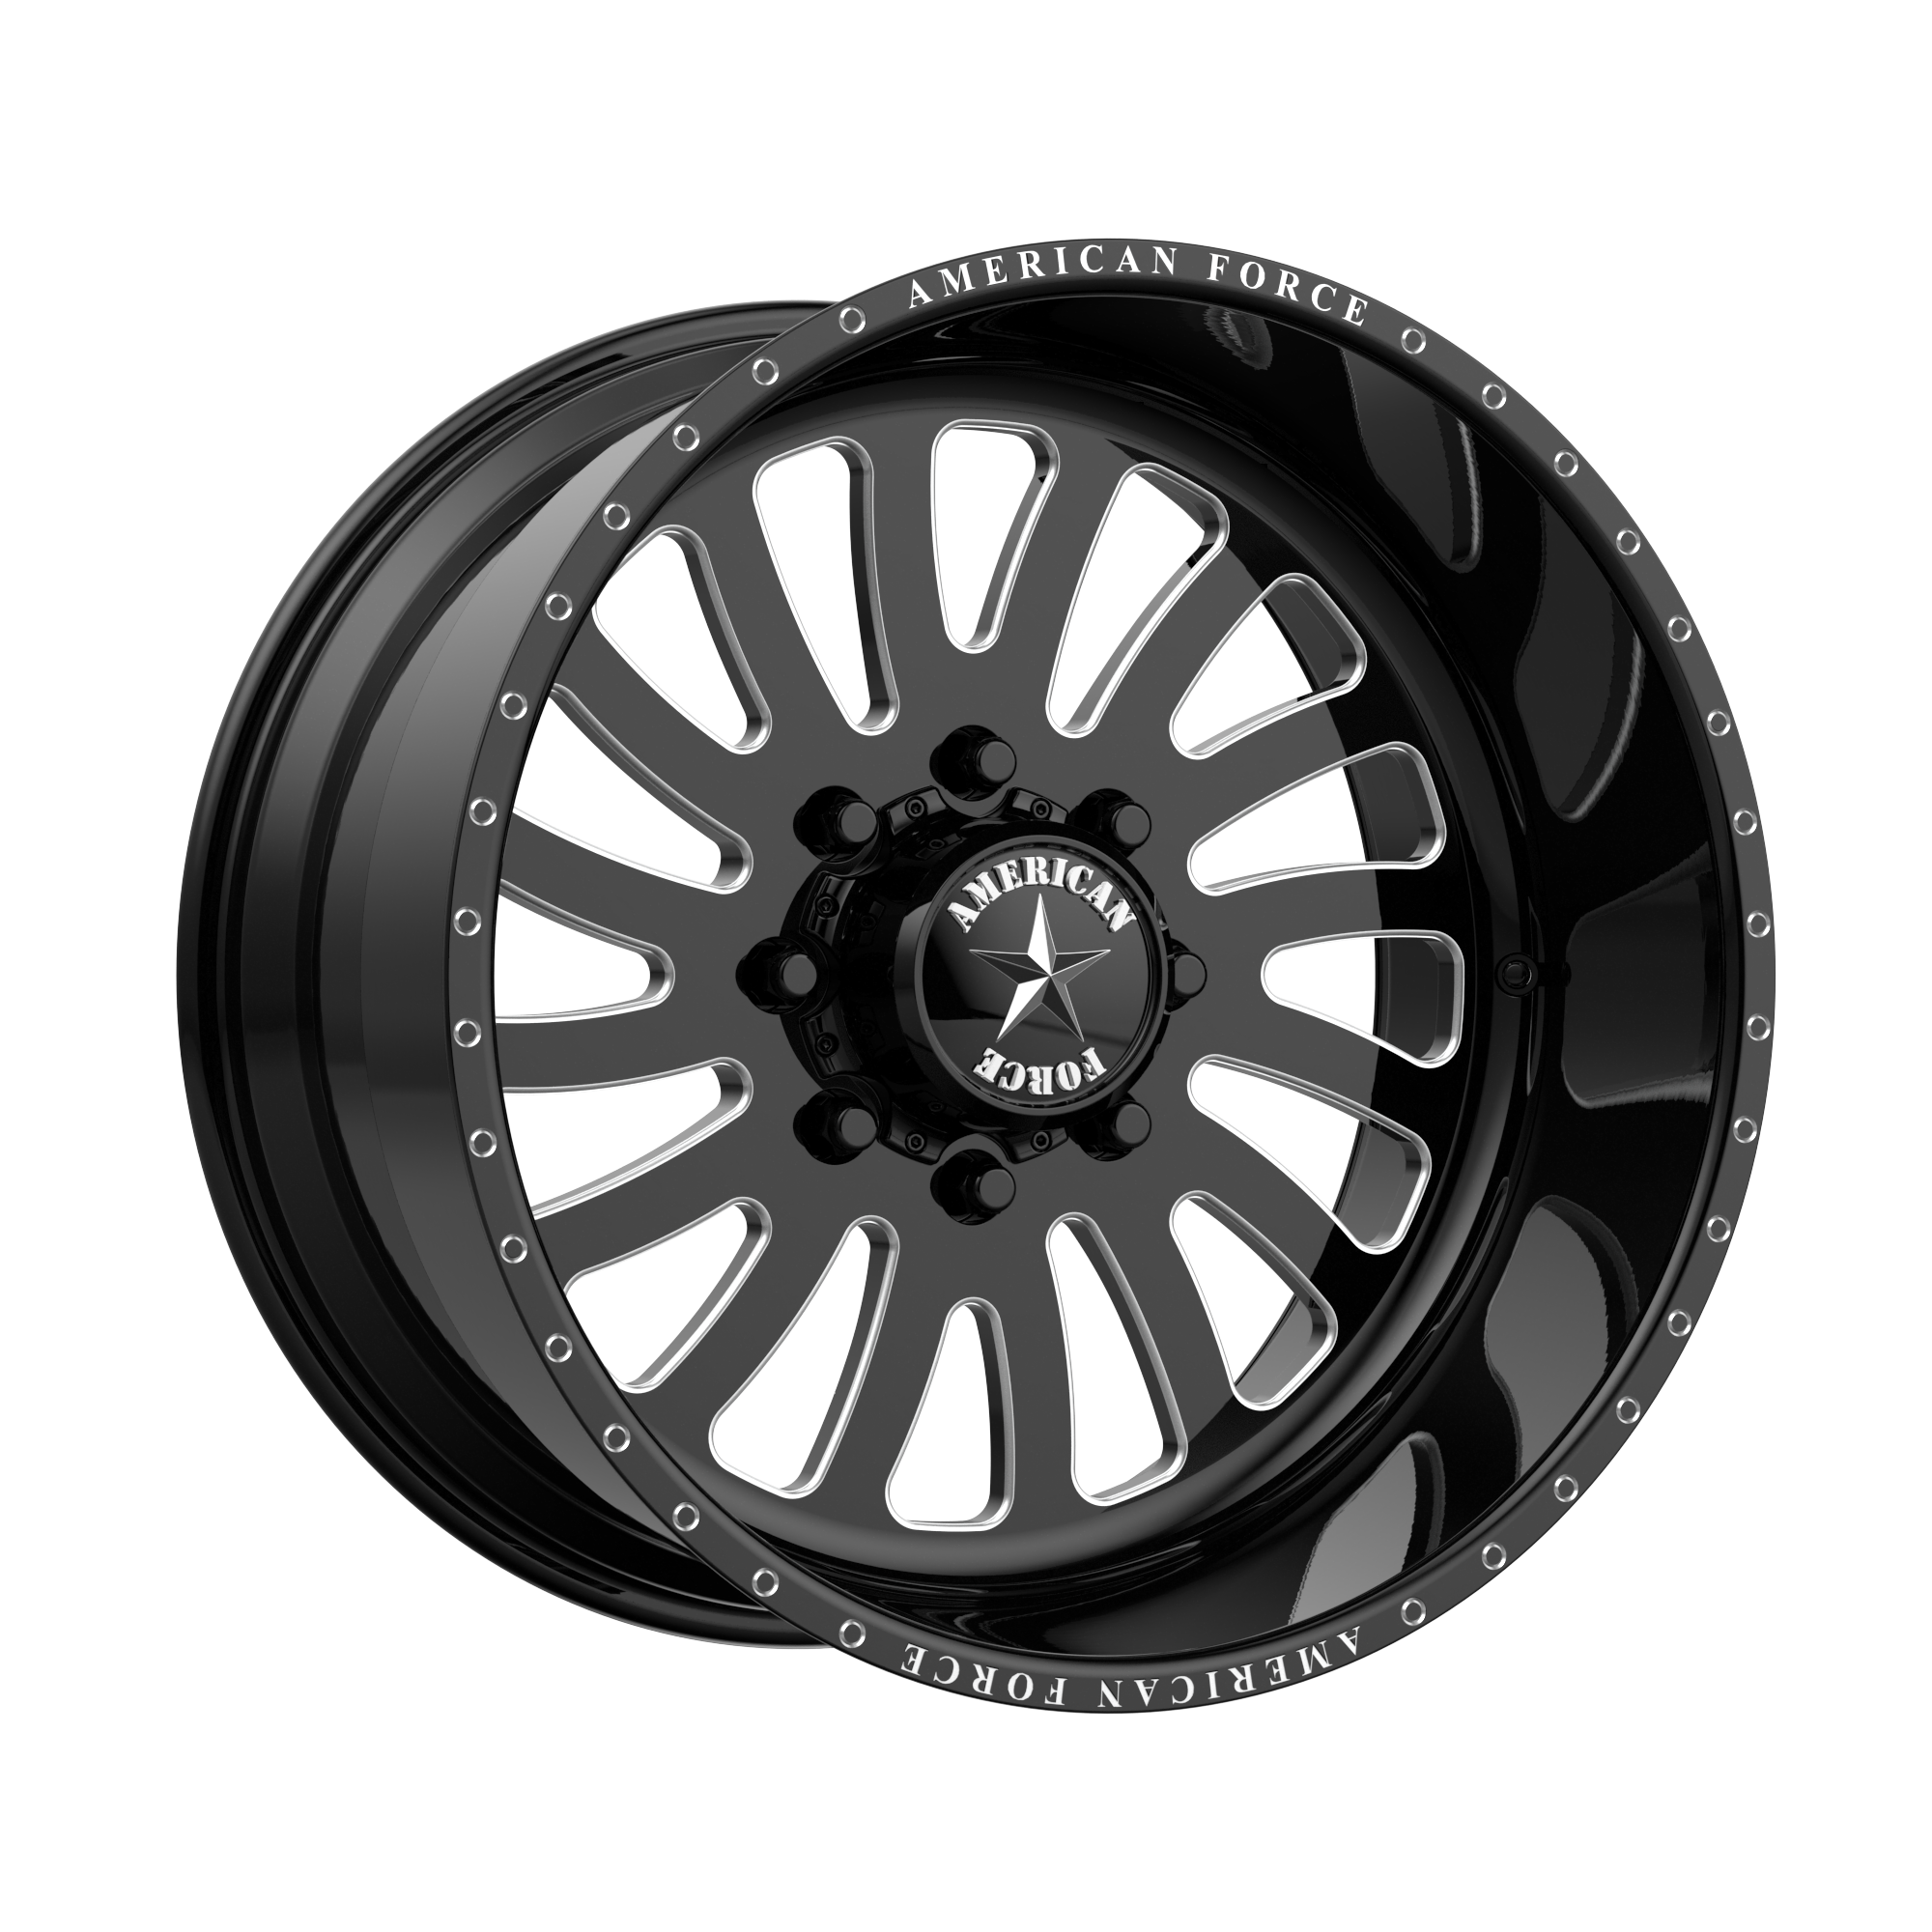 OCTANE SS 26x14 8x165.10 GLOSS BLACK MACHINED (-73 mm) - Tires and Engine Performance